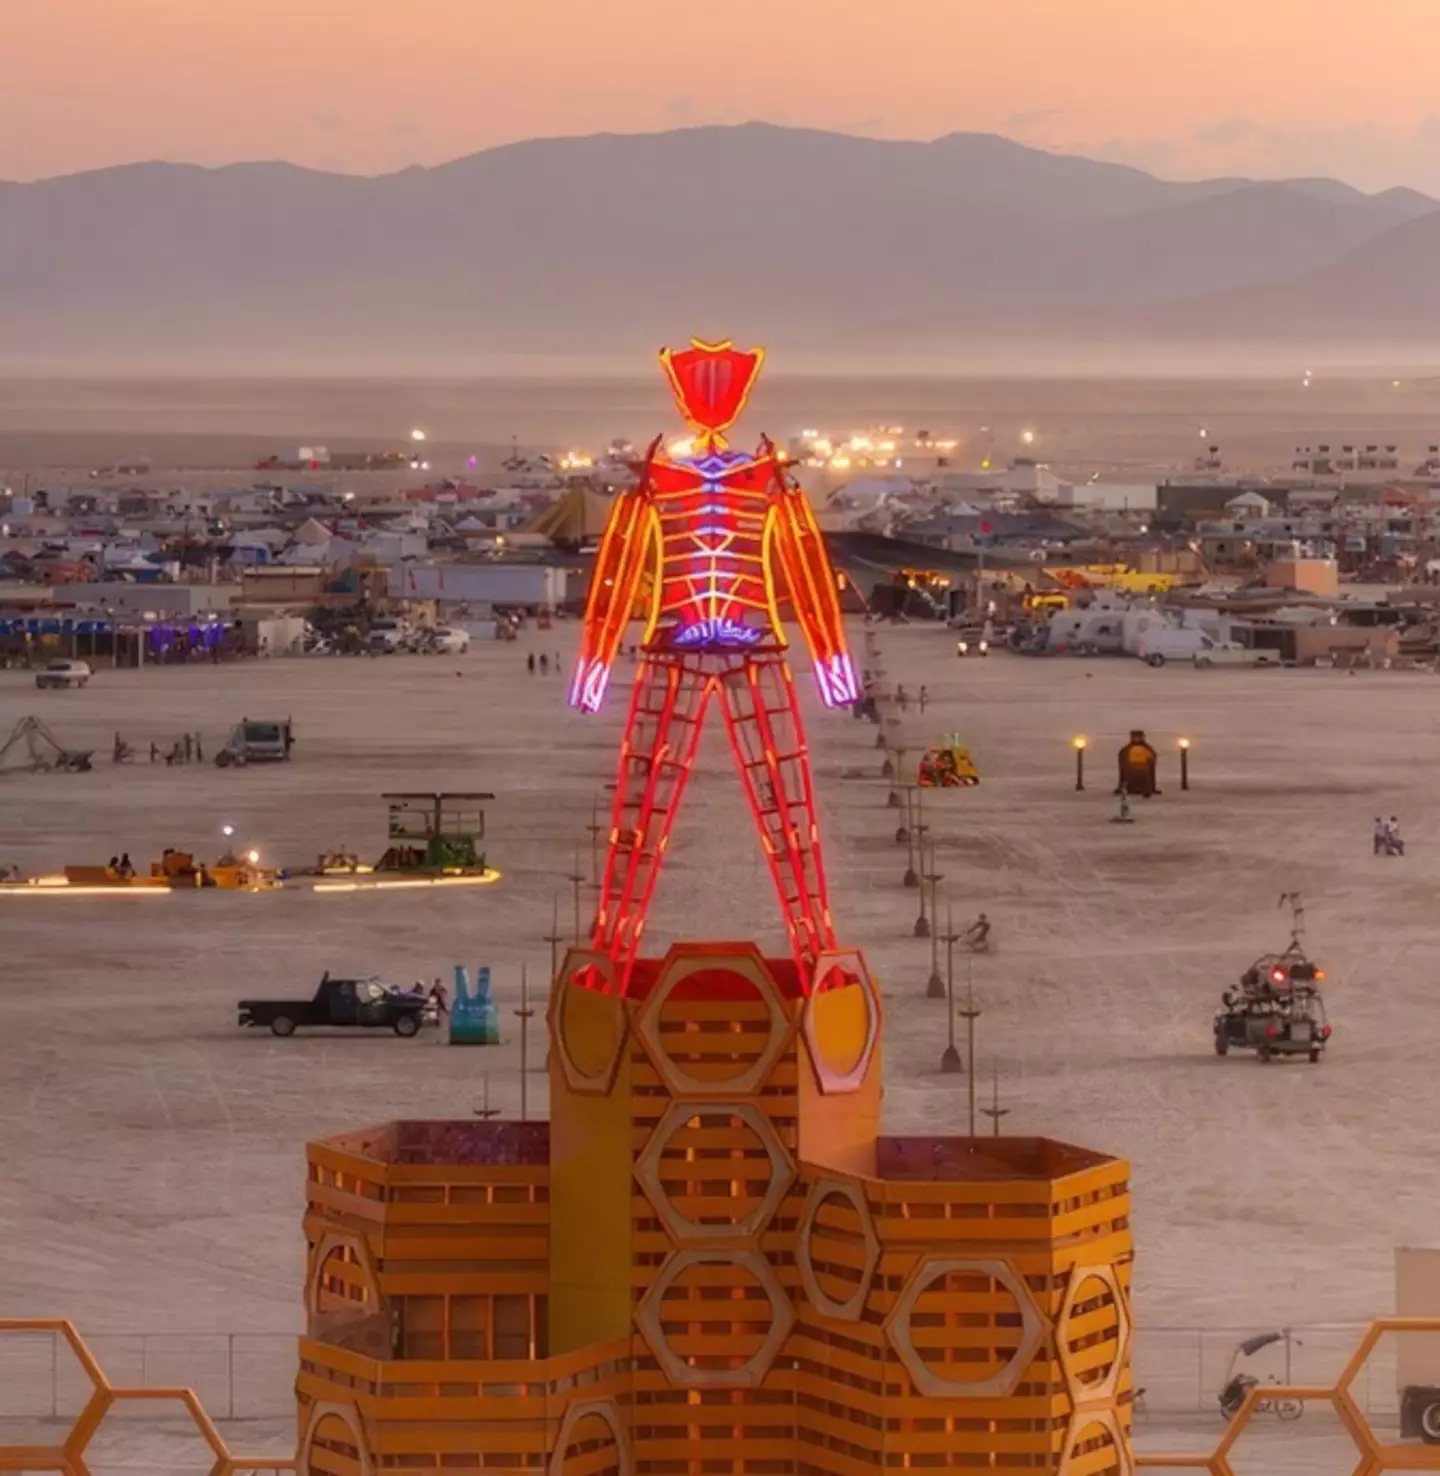 Jamal Abraham paid $7k to attend Burning Man and says it was worth it.